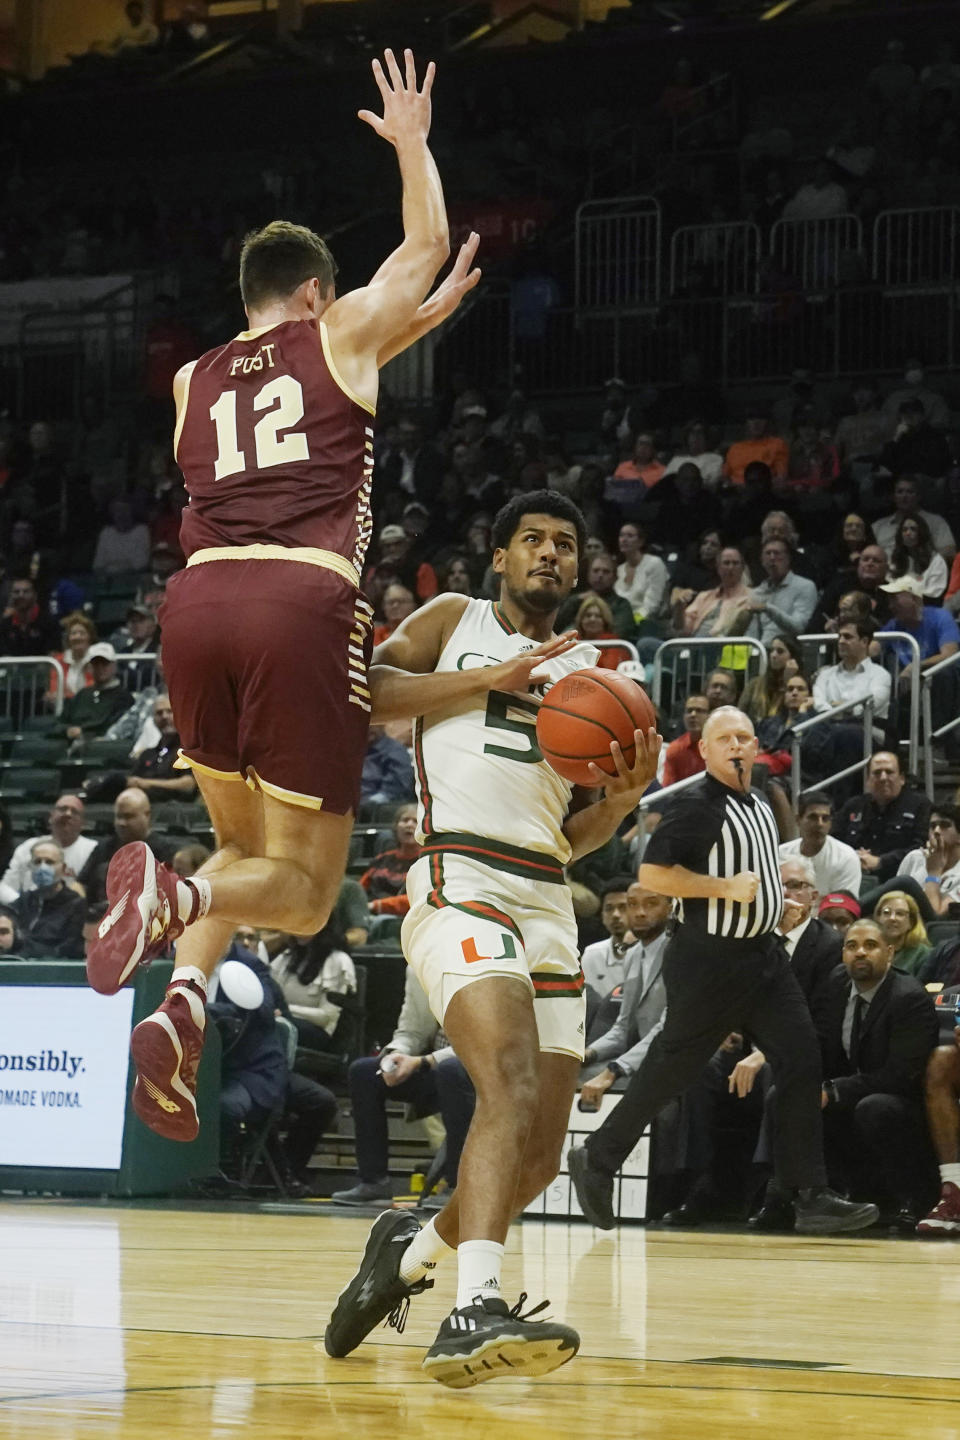 Miami guard Harlond Beverly (5) drives to the basket as Boston College forward Quinten Post (12) defends during the first half of an NCAA college basketball game, Wednesday, Jan. 11, 2023, in Coral Gables, Fla. (AP Photo/Marta Lavandier)